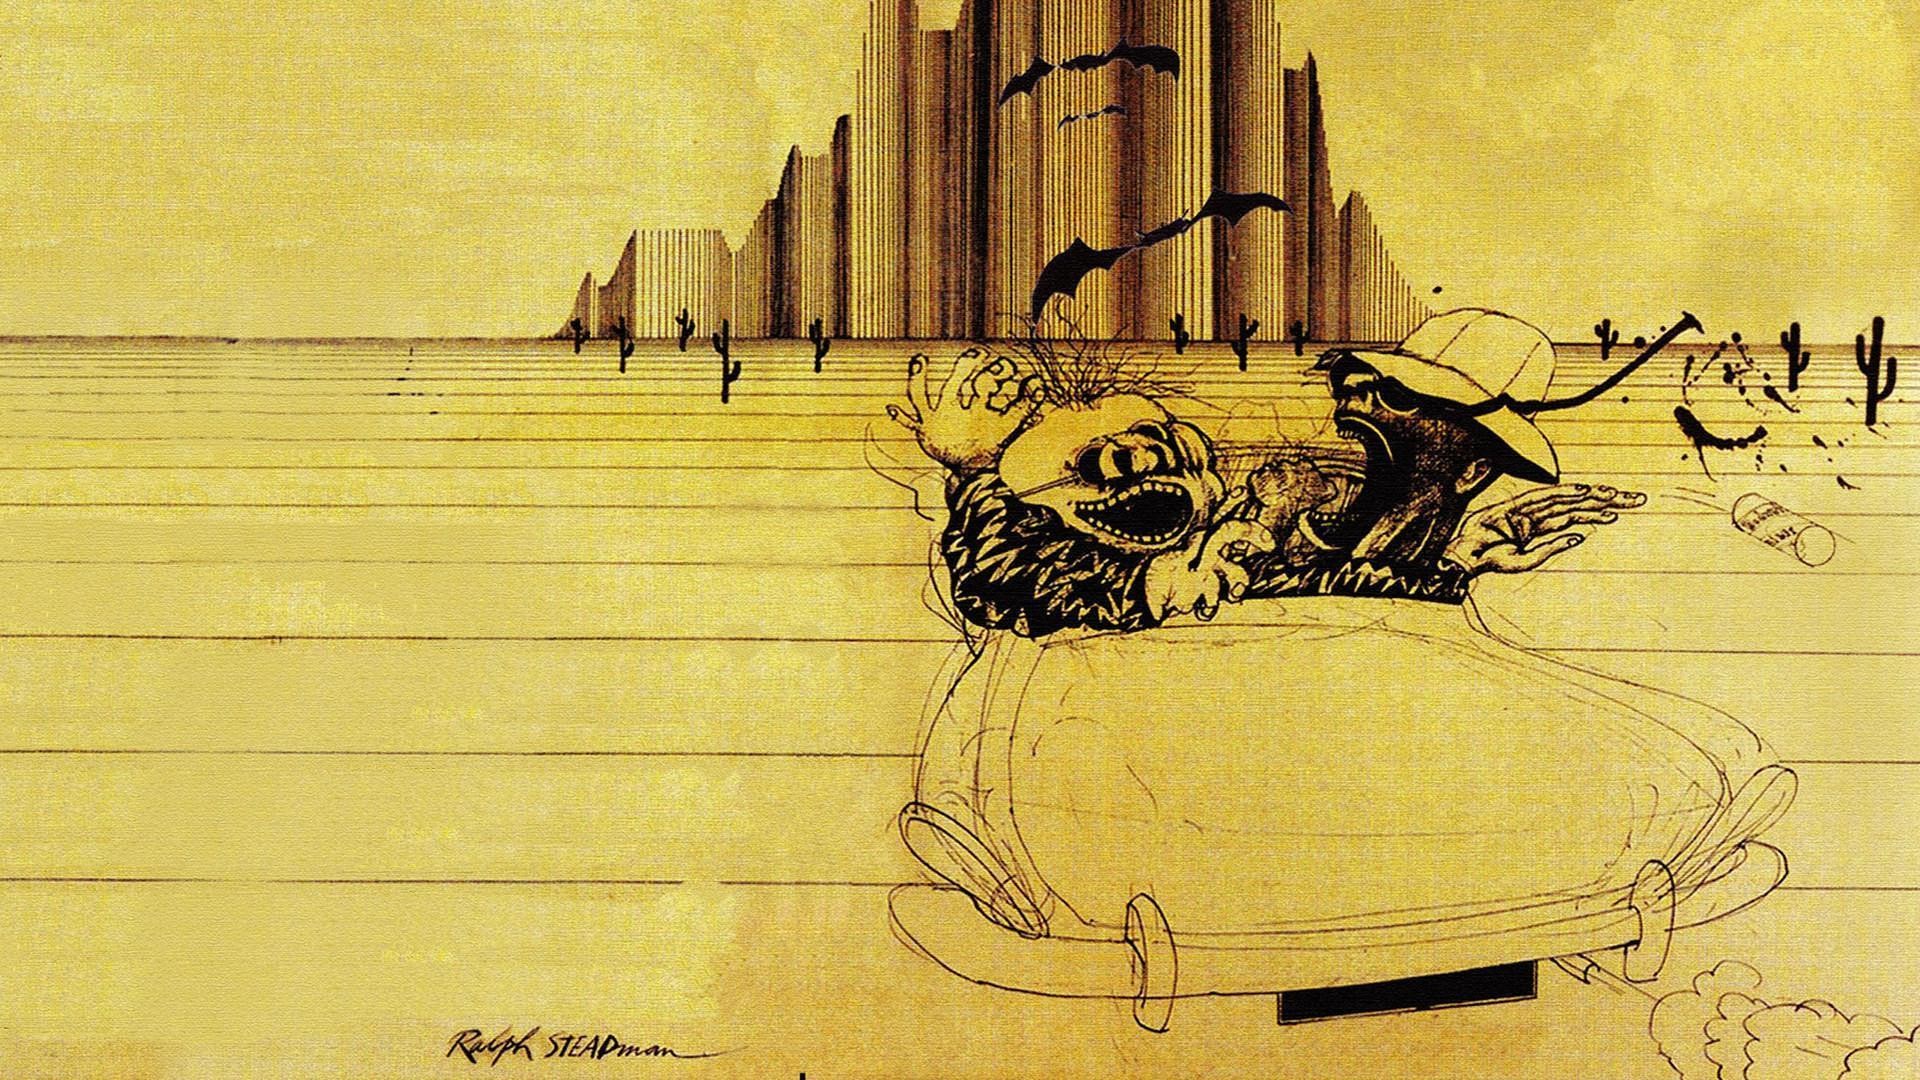 1920x1080 Fear and Loathing in Las Vegas images Ralph Steadman illustration HD  wallpaper and background photos